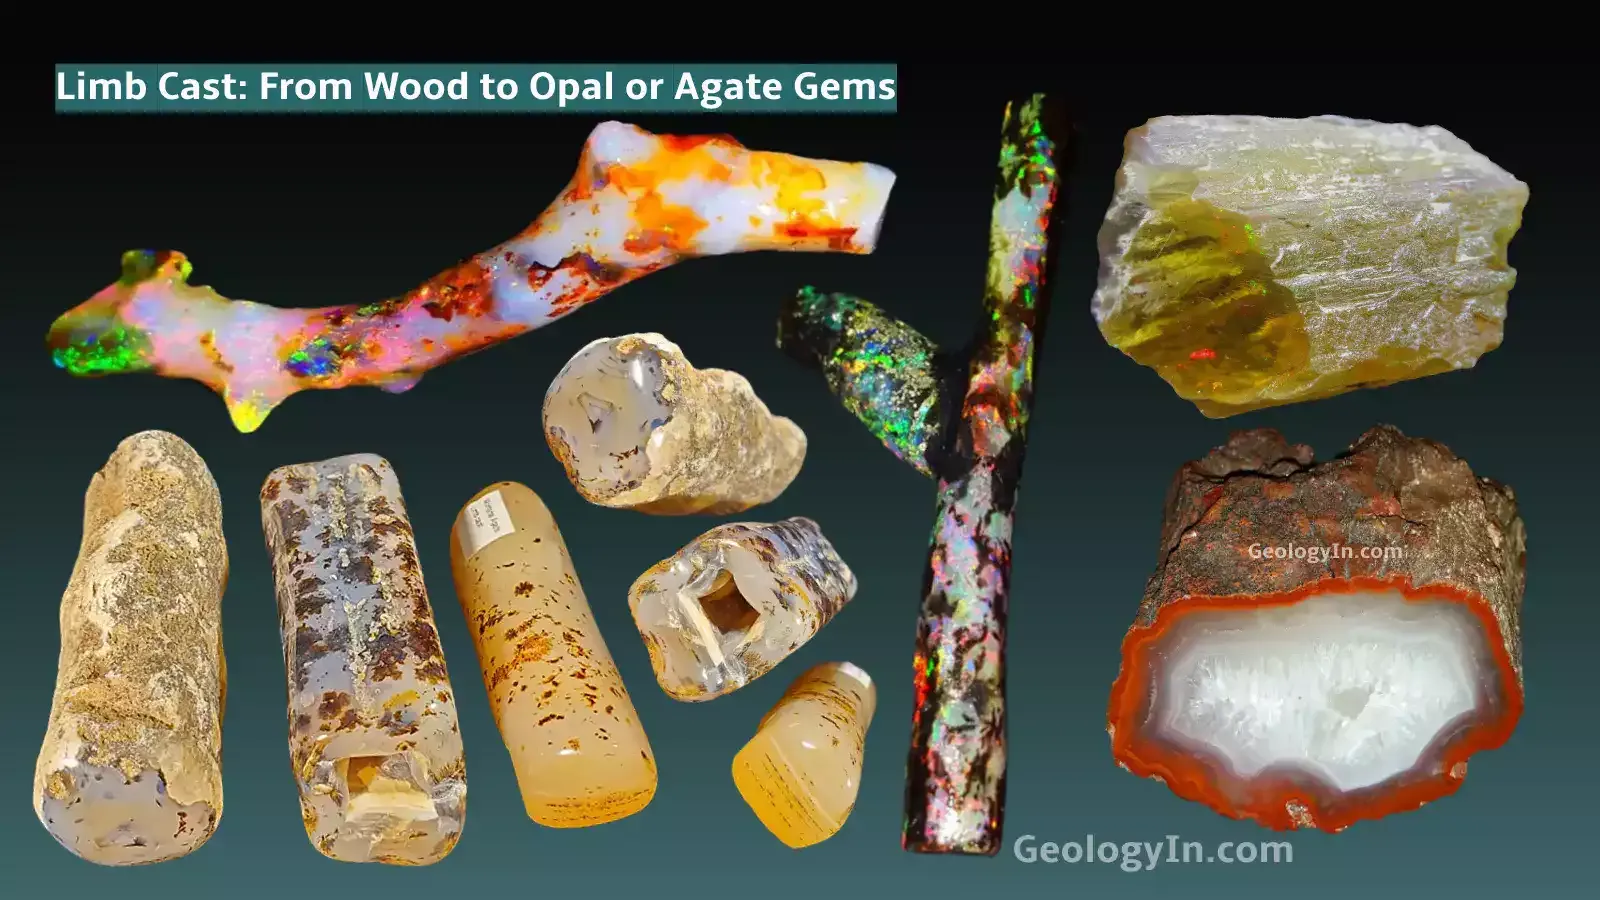 Limb Cast: From Wood to Opal or Agate Gems